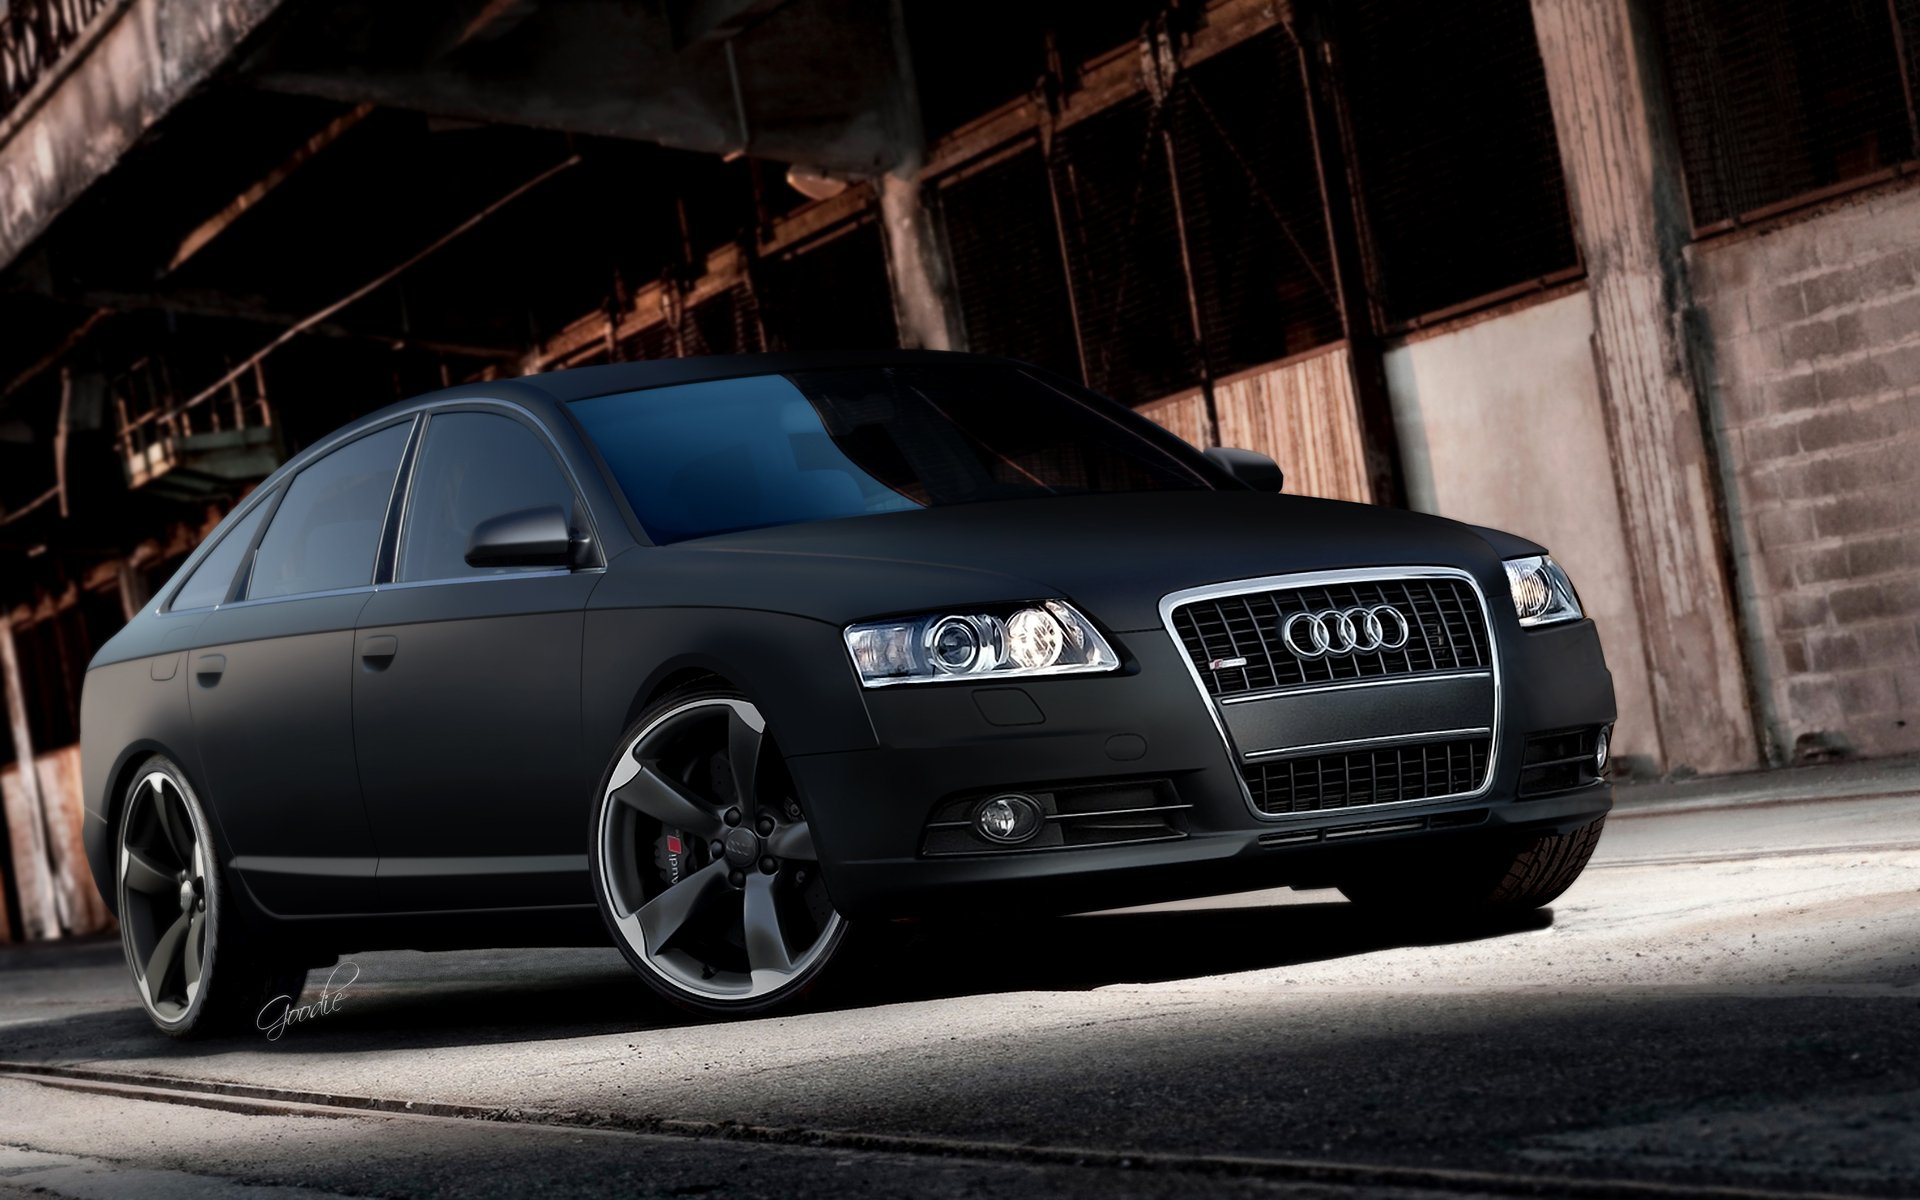 40+ Audi A6 HD Wallpapers and Backgrounds